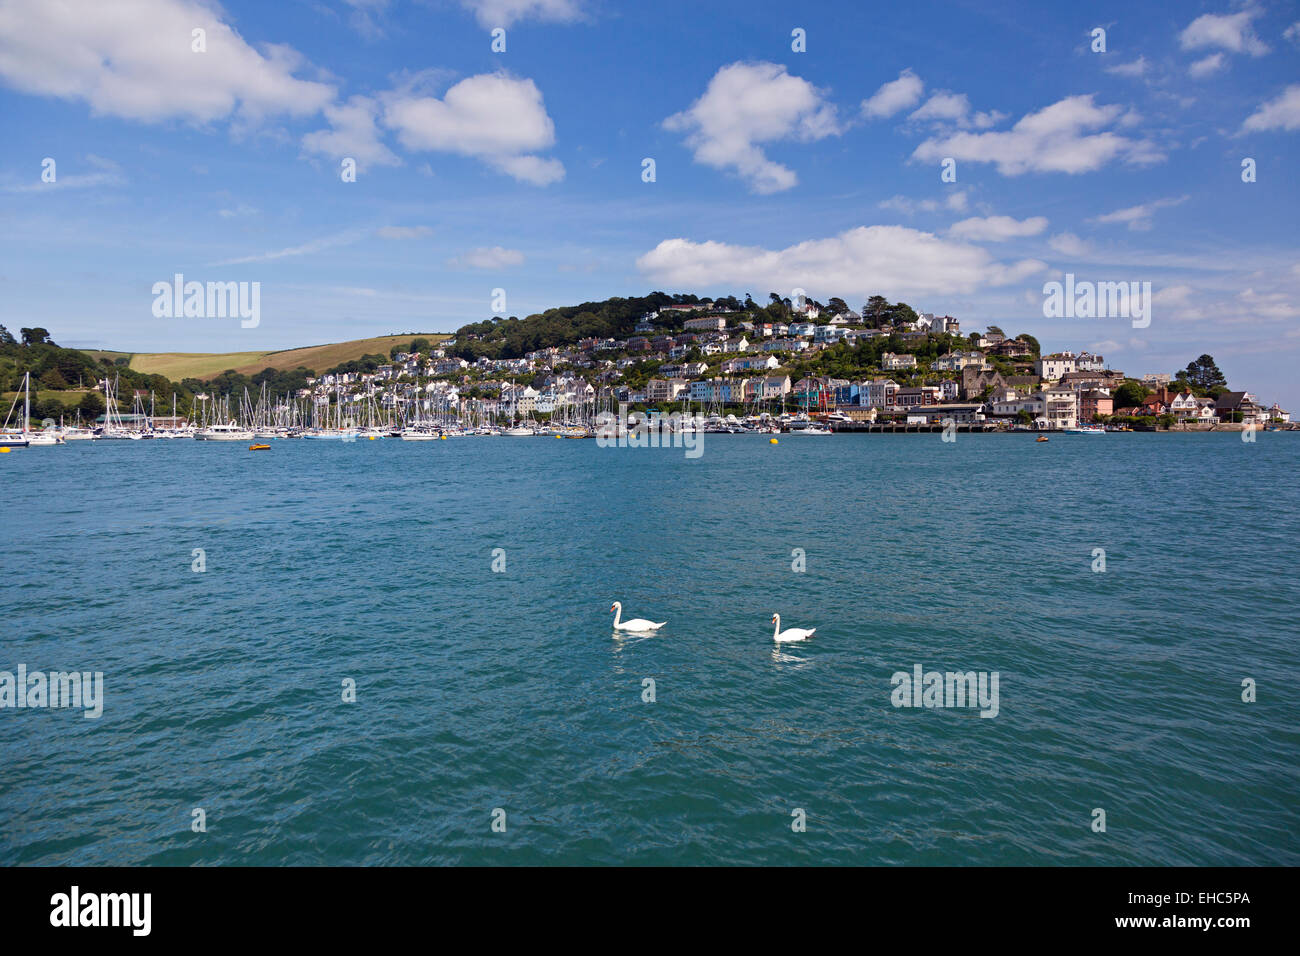 Kingswear from Dartmouth, South Hams, Devon, south-west England, UK, two swans swimming on the river Dart in foreground Stock Photo